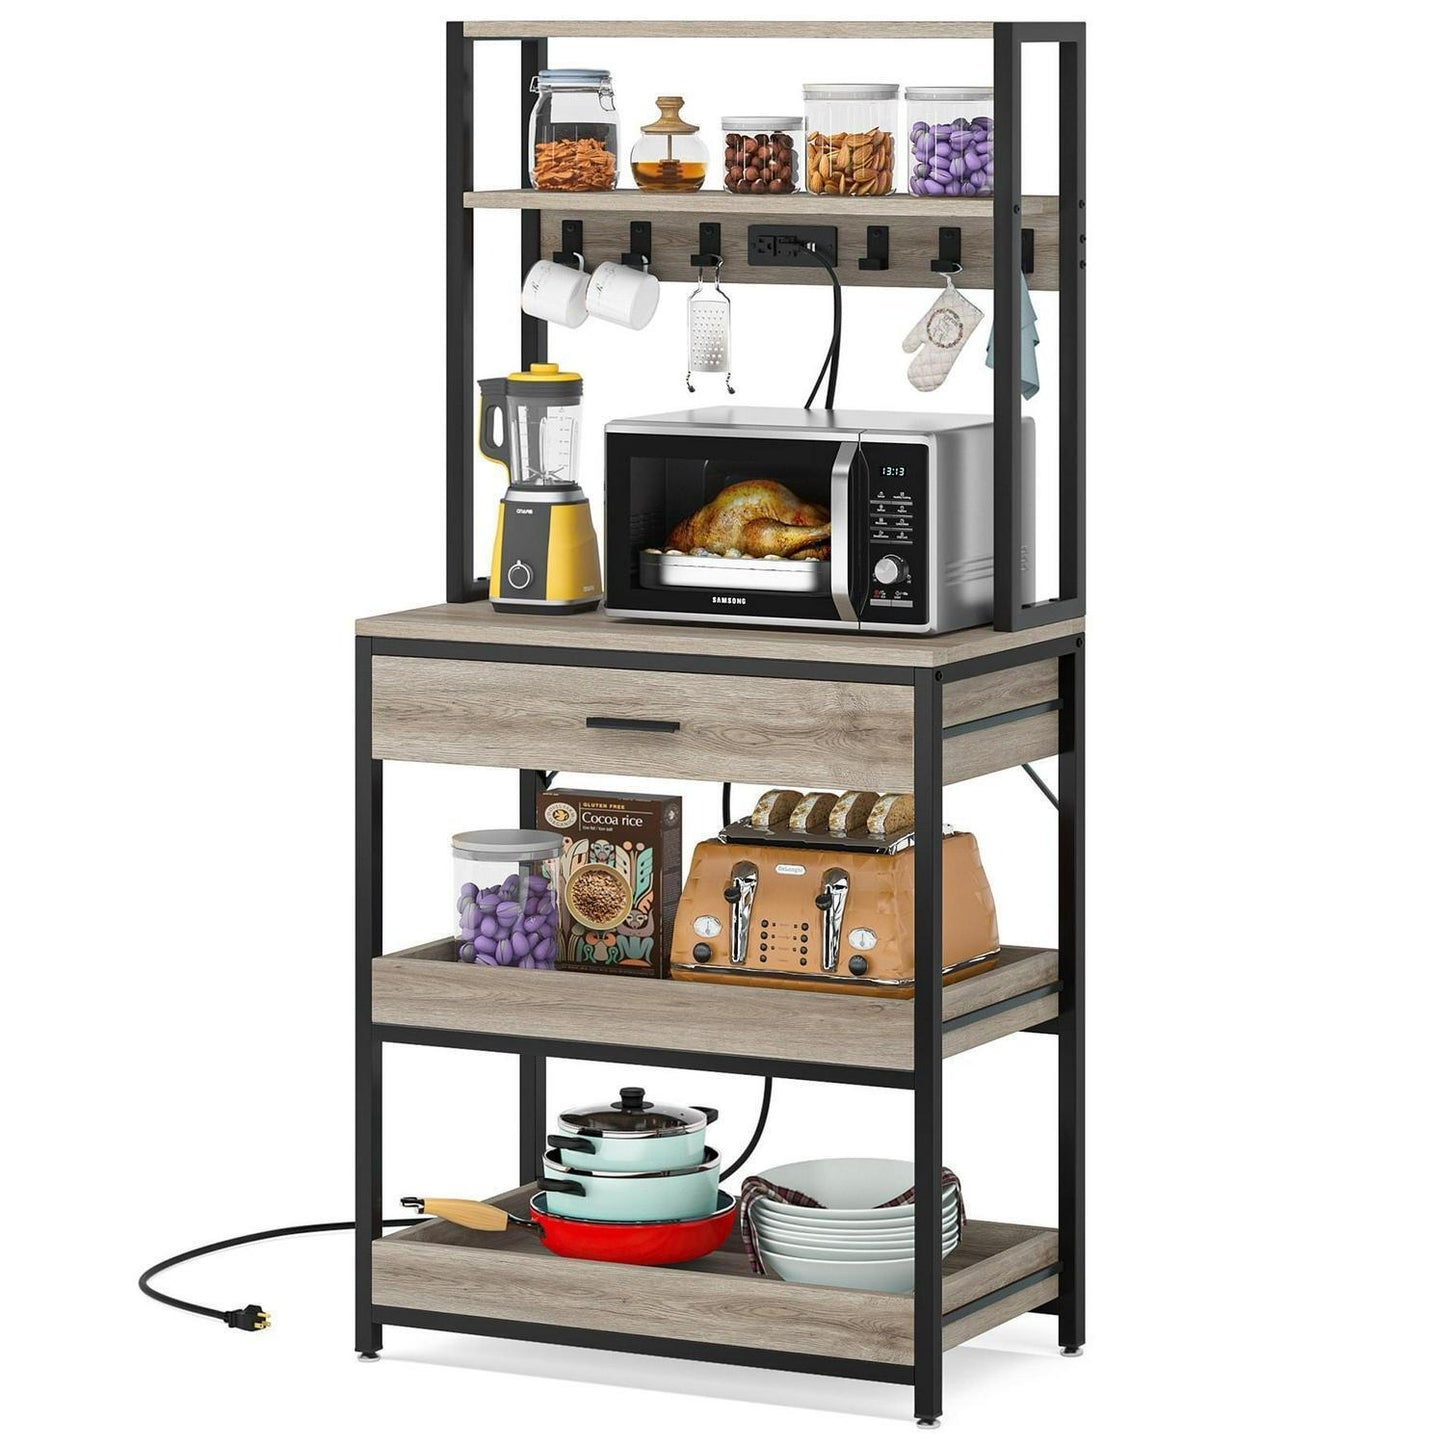 5.5ft 2-Tier Kitchen Baker's Rack w/ Outlets, Rustic Grey Fin - Microwave Stand